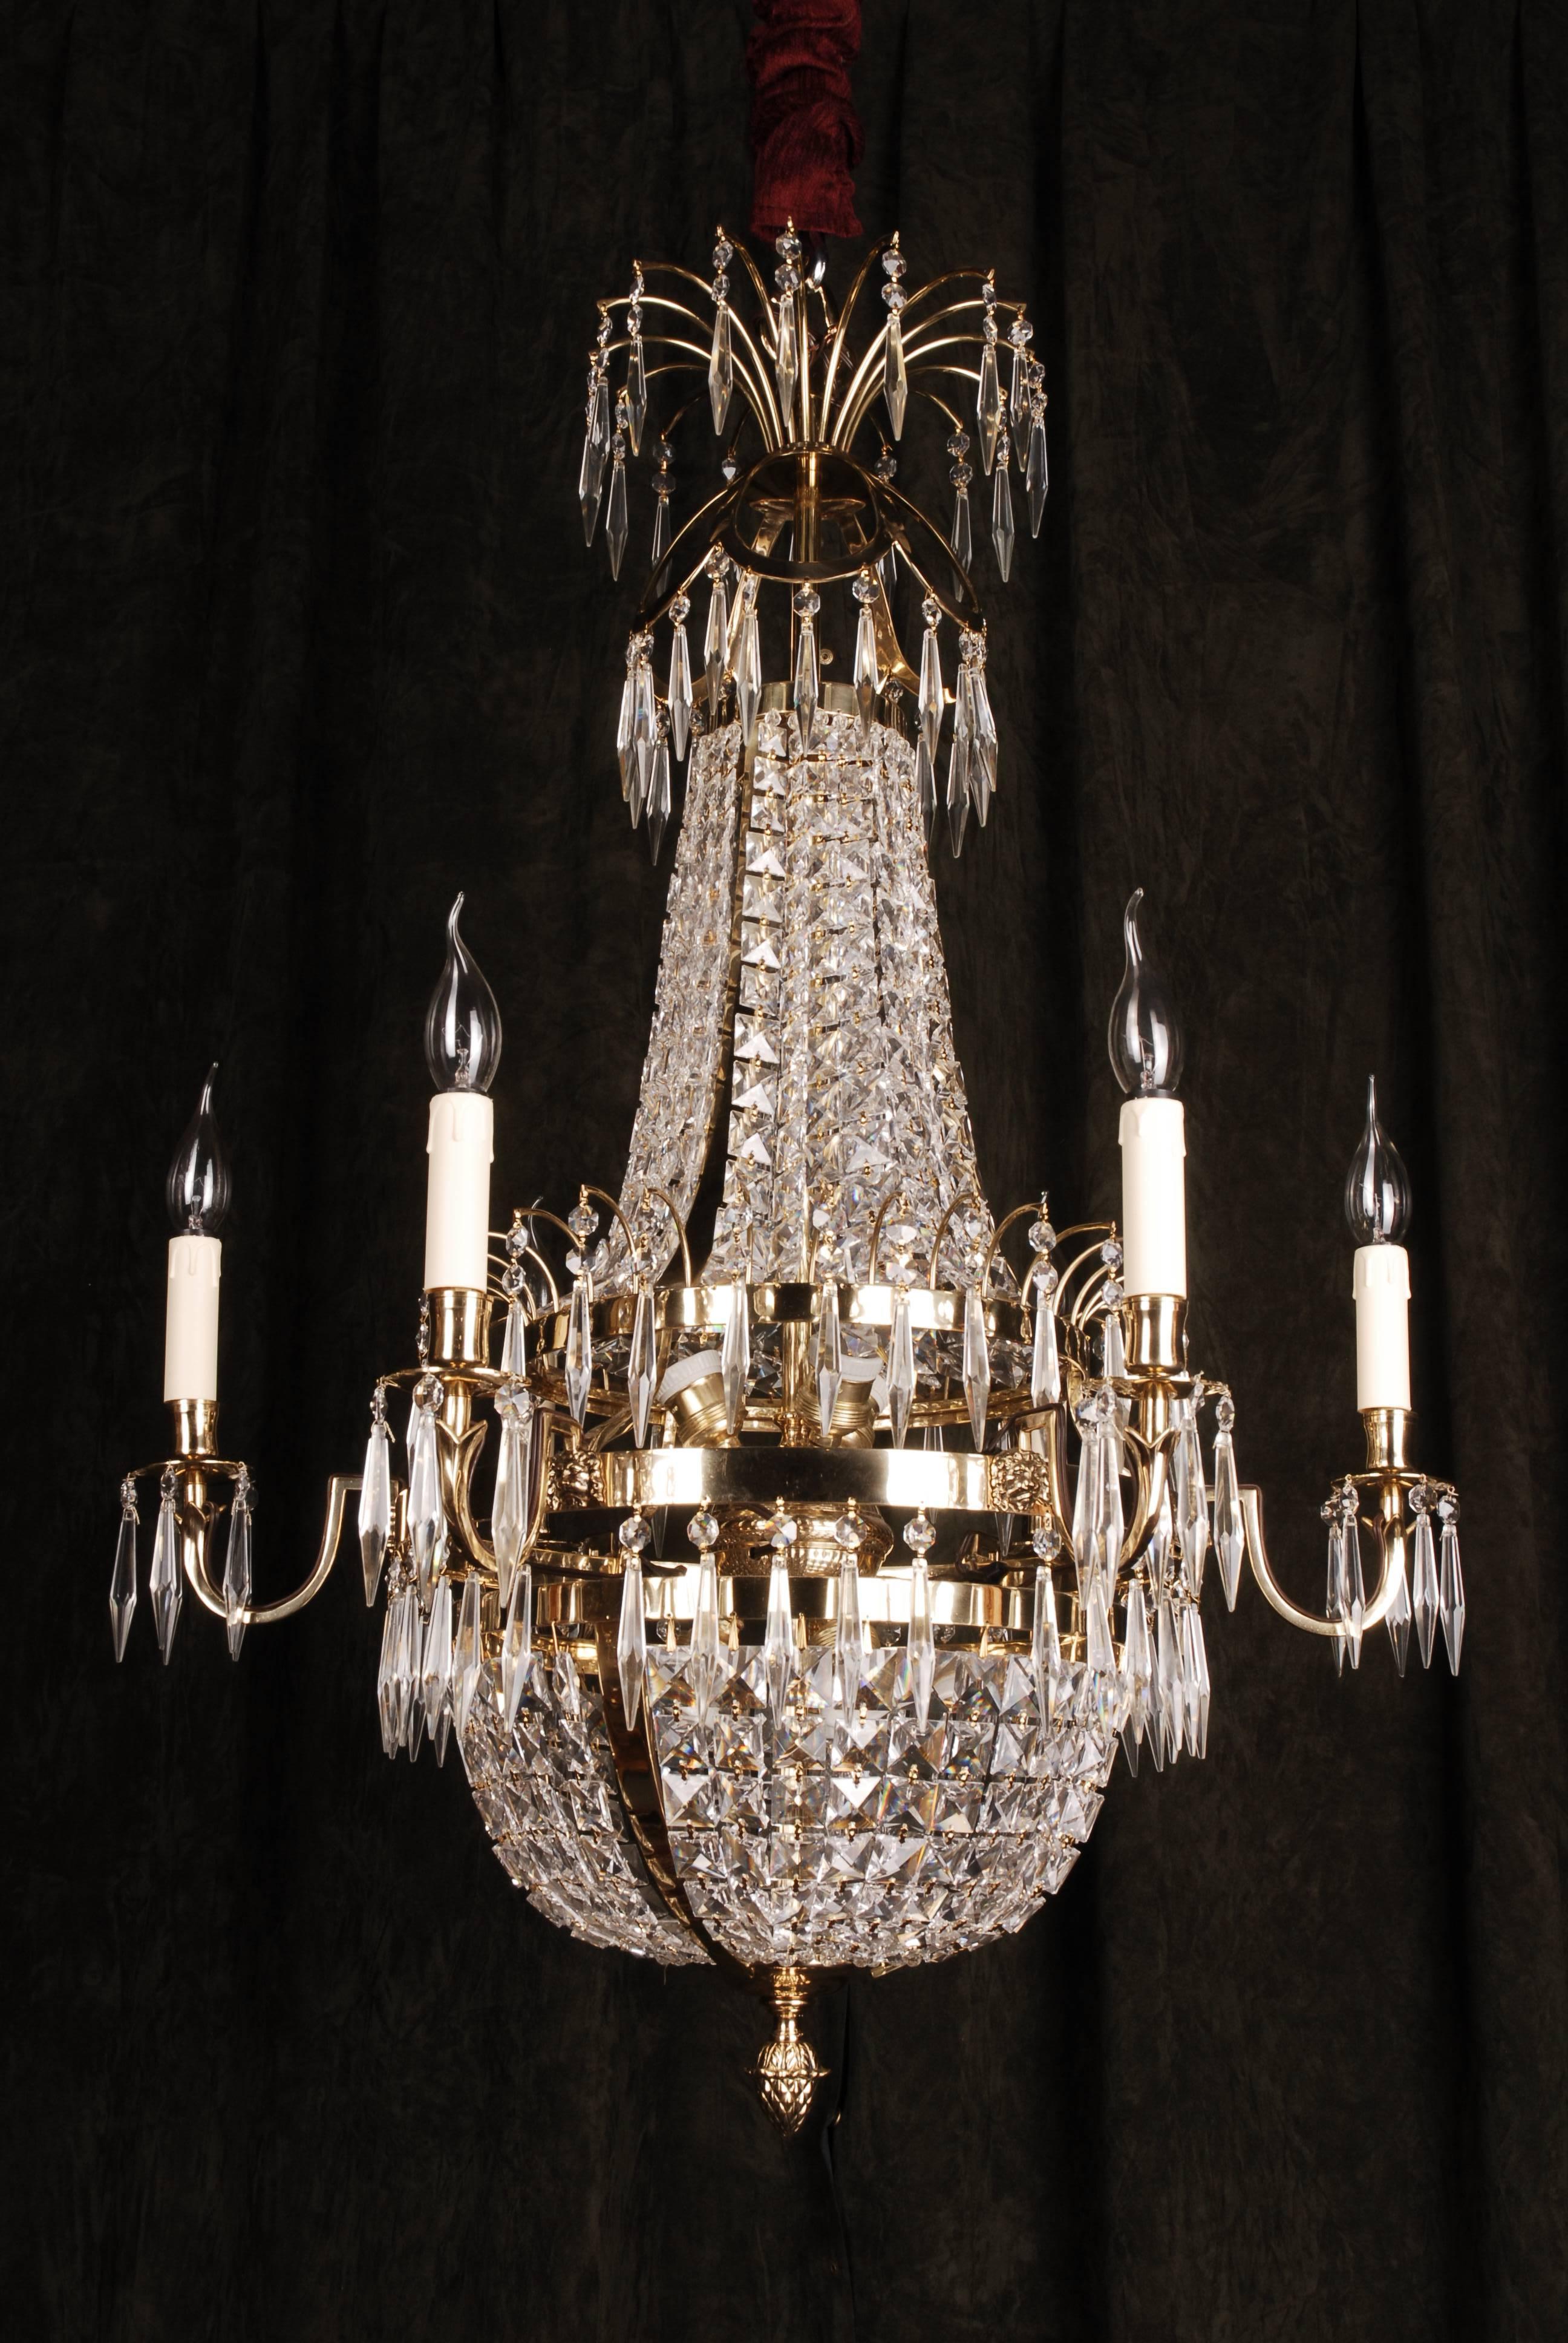 Swedish Empire ceiling candelabra in classicist style.
Polished brass and facet-ground prism hangings.

(F-Ra-80).